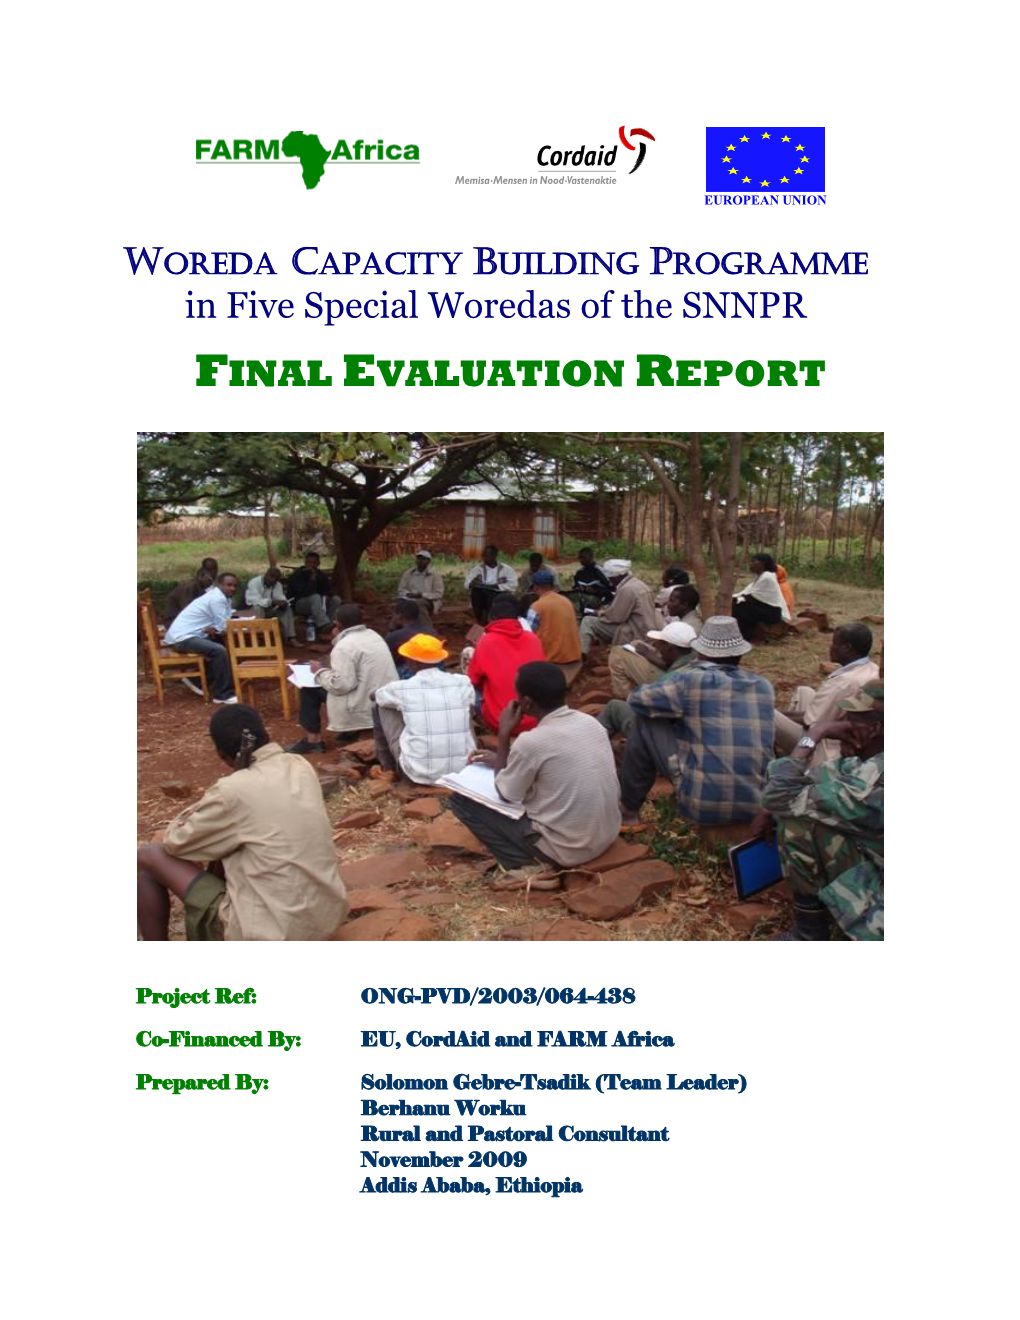 Draft Report of Final Evaluation of FARM Africa WCBP